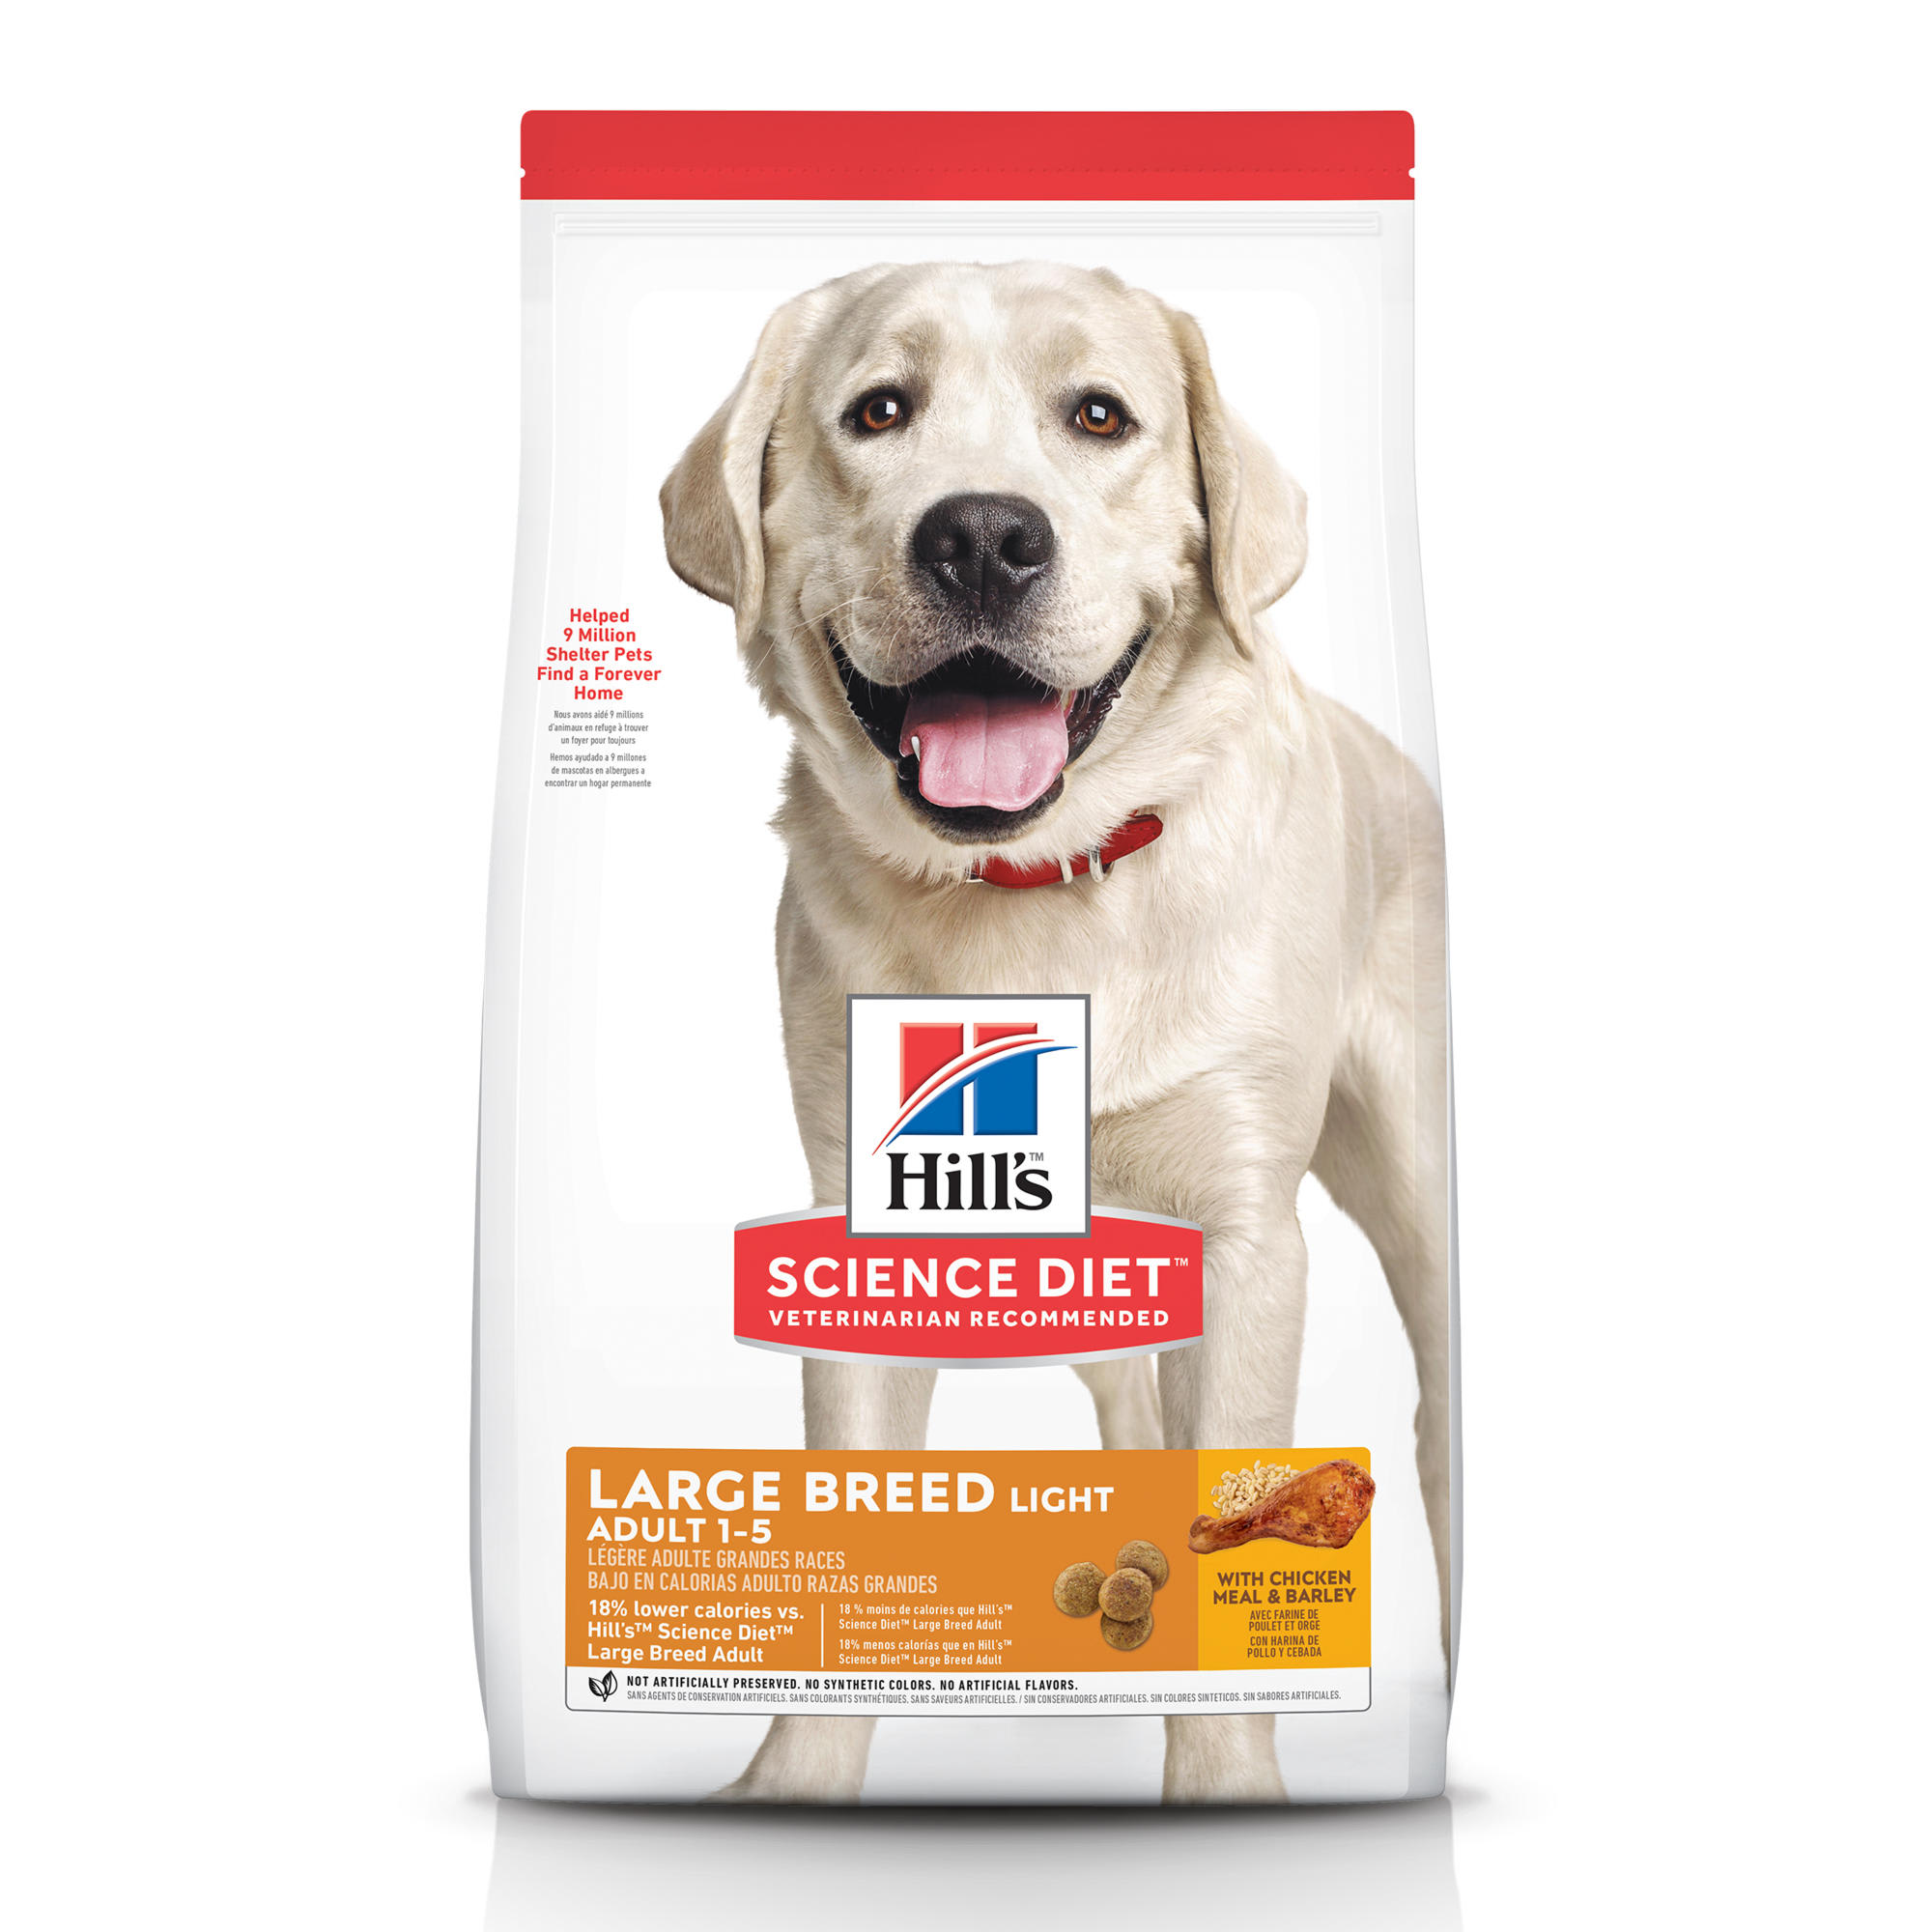 Hill's Science Diet Adult Large Breed with Chicken Meal & Barley Dry Food, 30 lbs., Bag | Petco